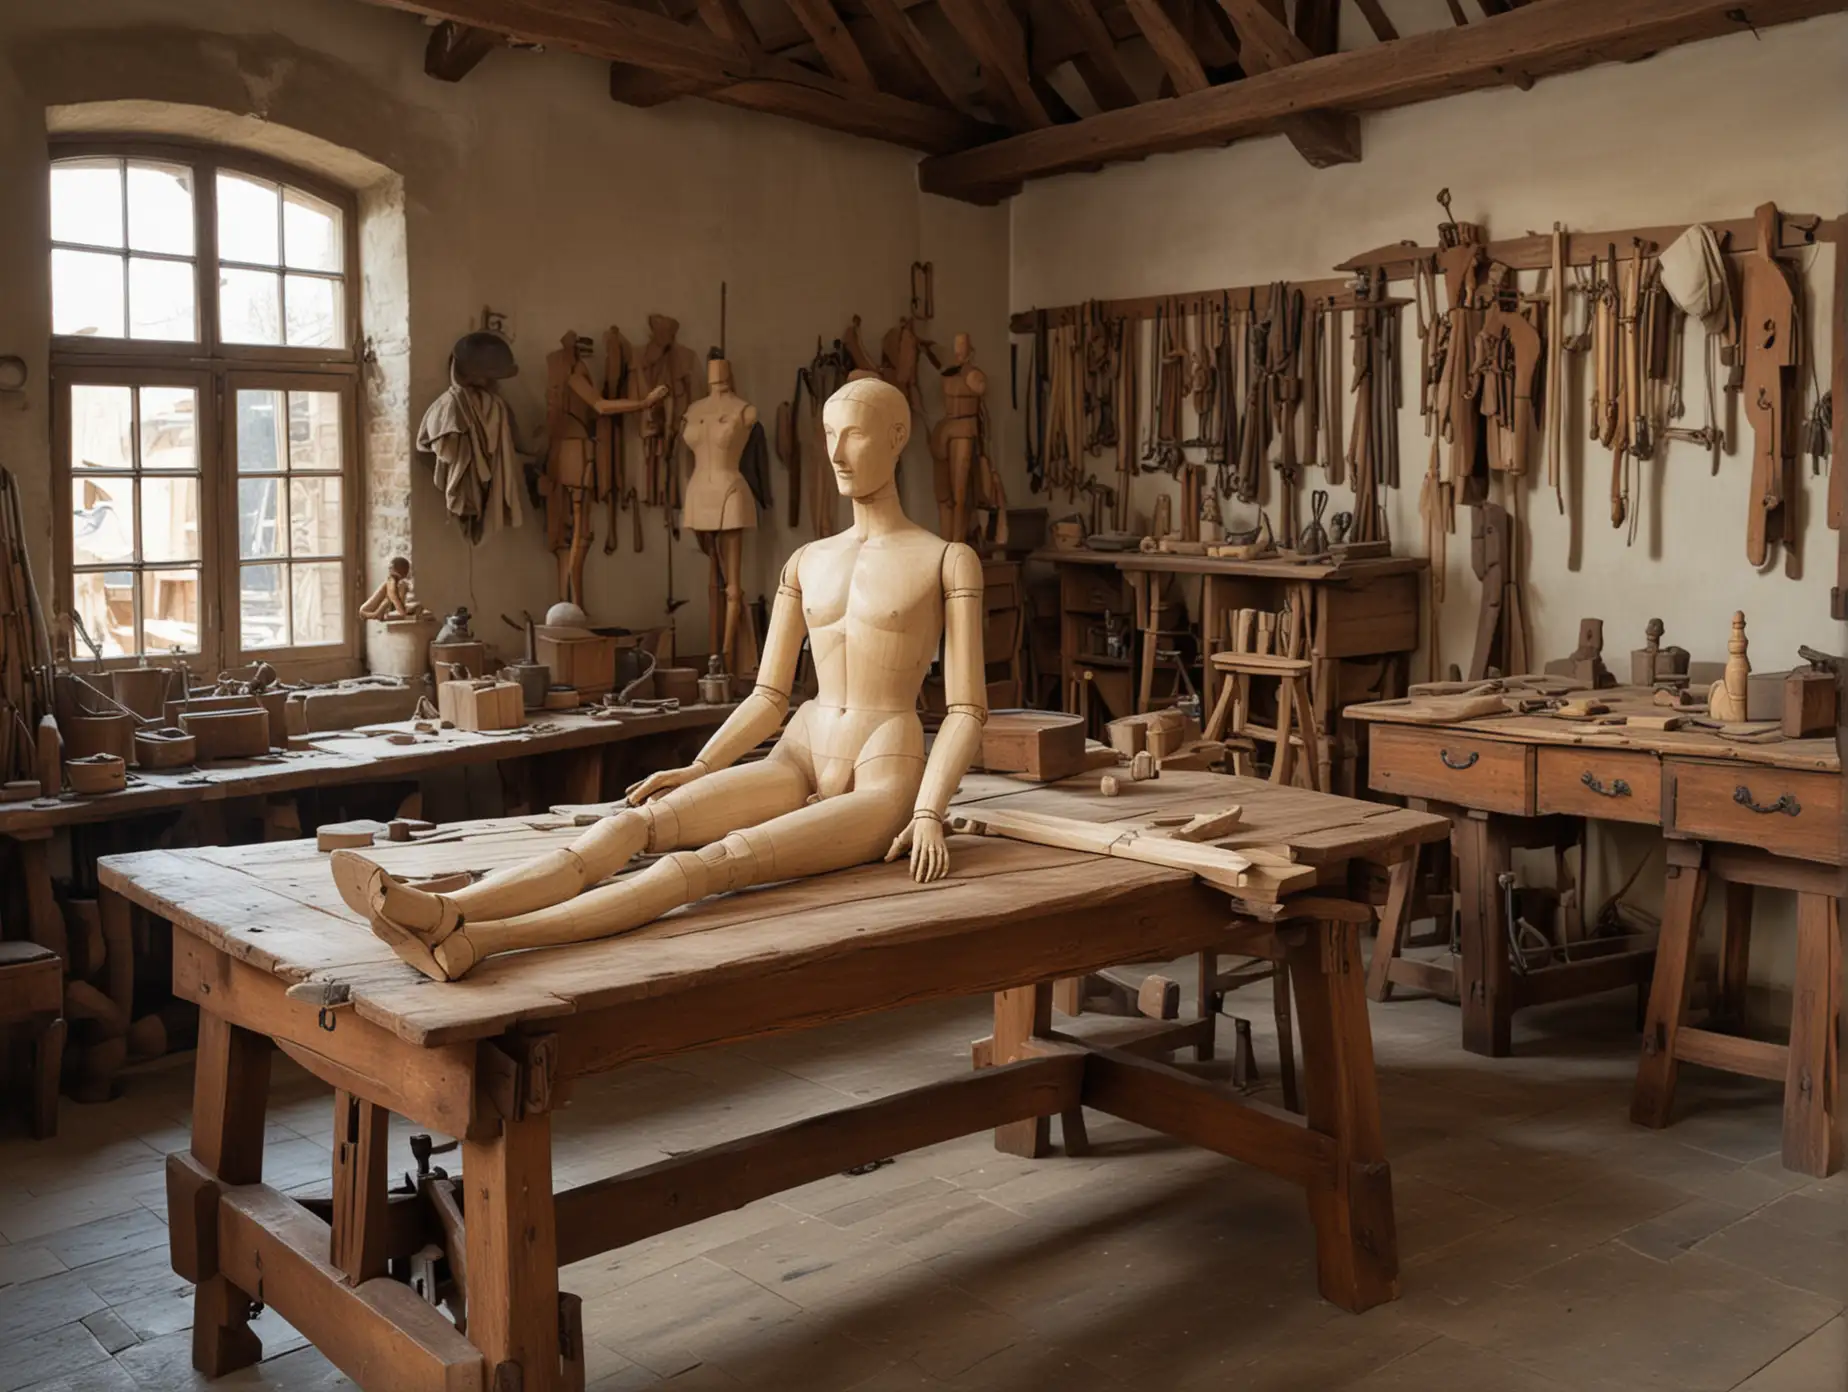 16th century workshop interior with a large half-constucted wooden mannequin lying on a wooden table